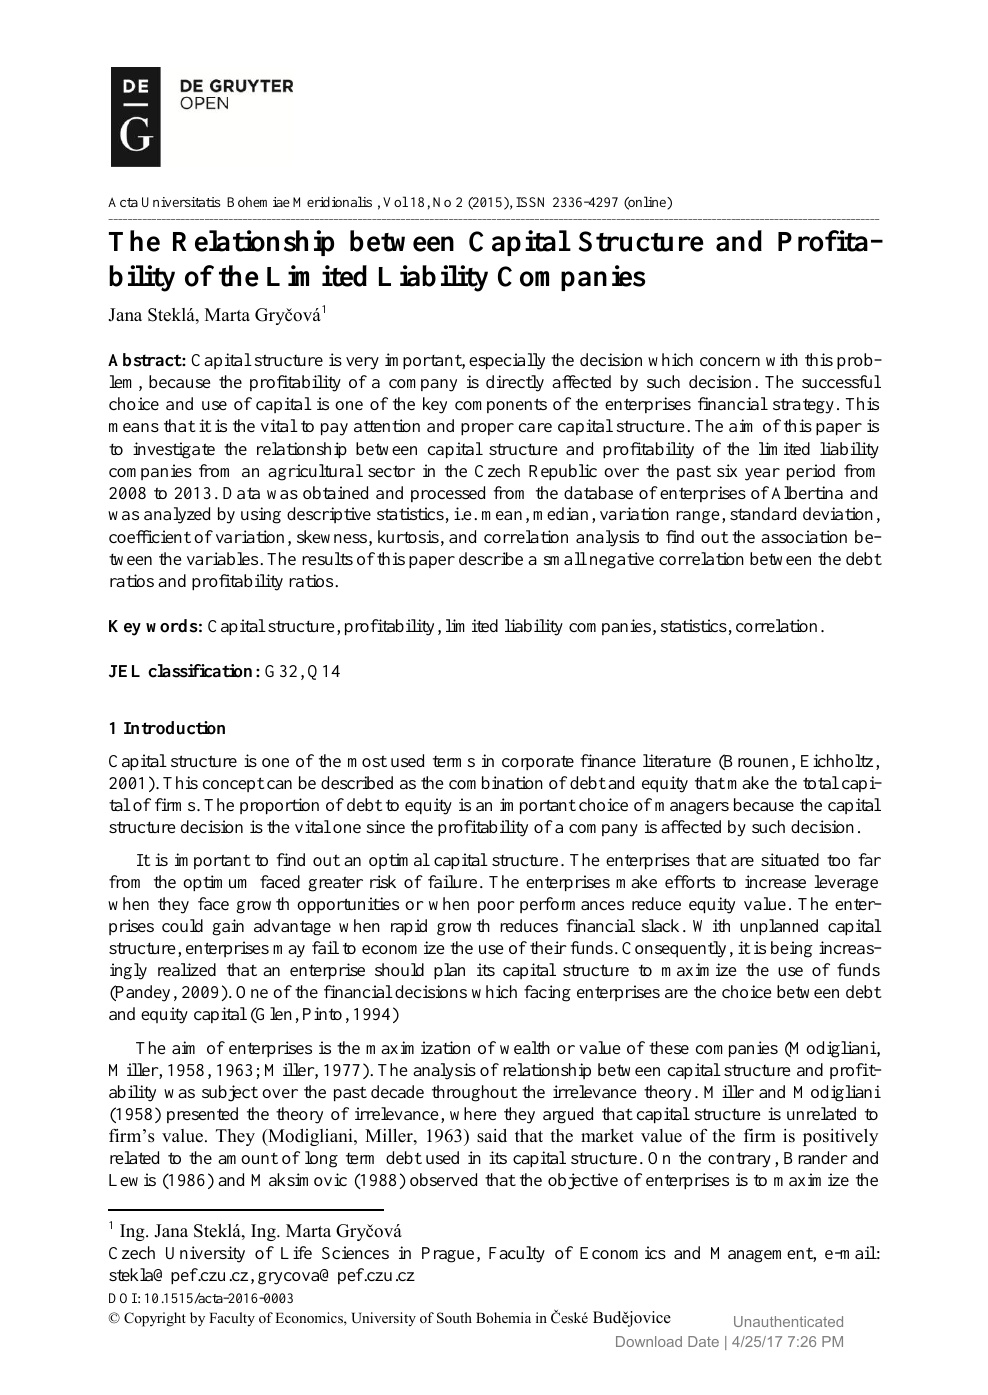 research paper on capital structure